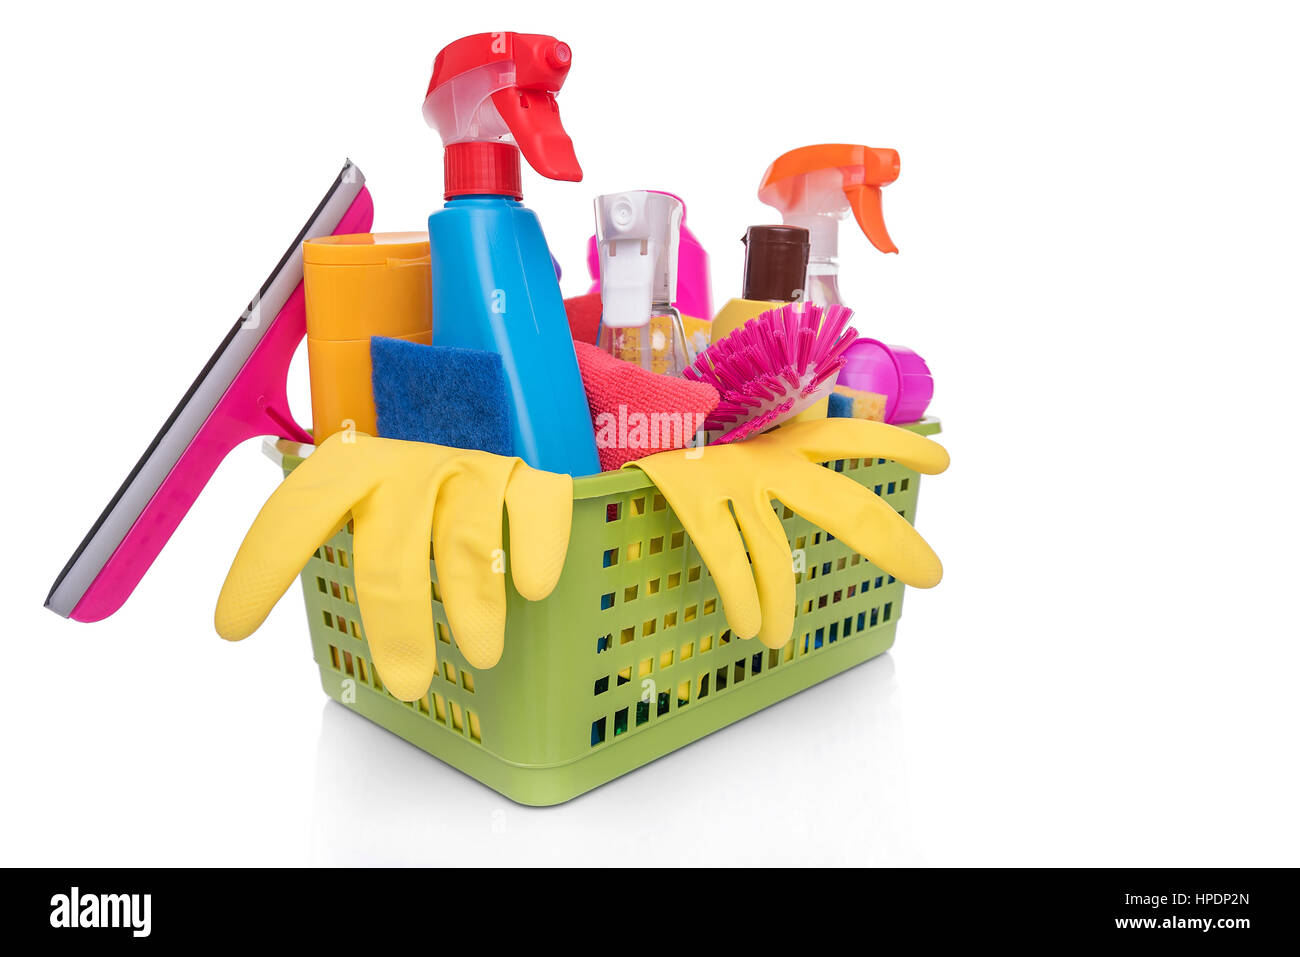 Cleaning Products Basket Stock Illustrations – 455 Cleaning